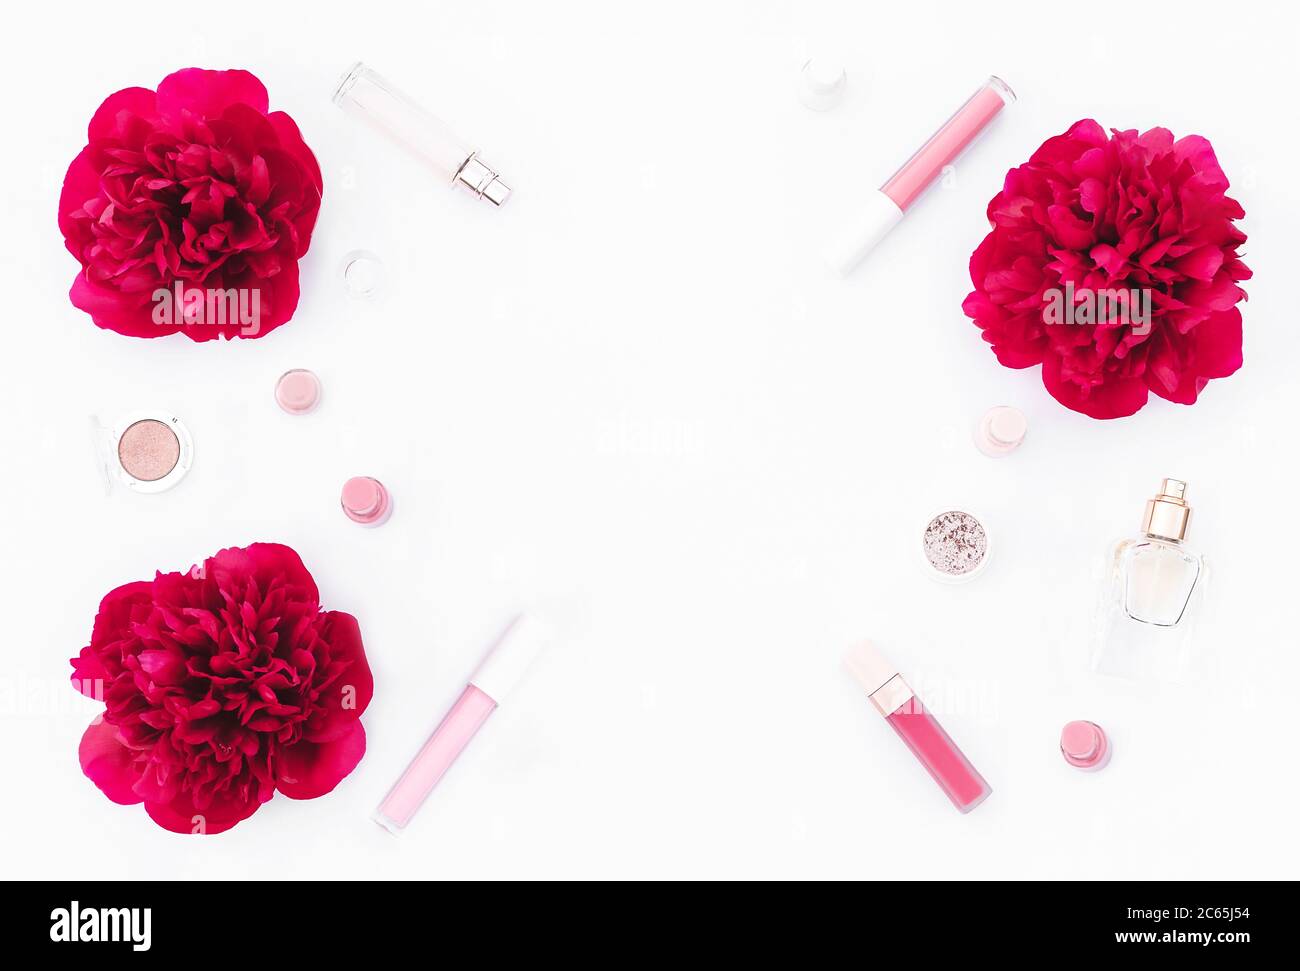 Trendy design template with pink cosmetics layout decorated with wine red peonies on white background. Flat lay style. Copy space. Mockup for your design. Stock Photo